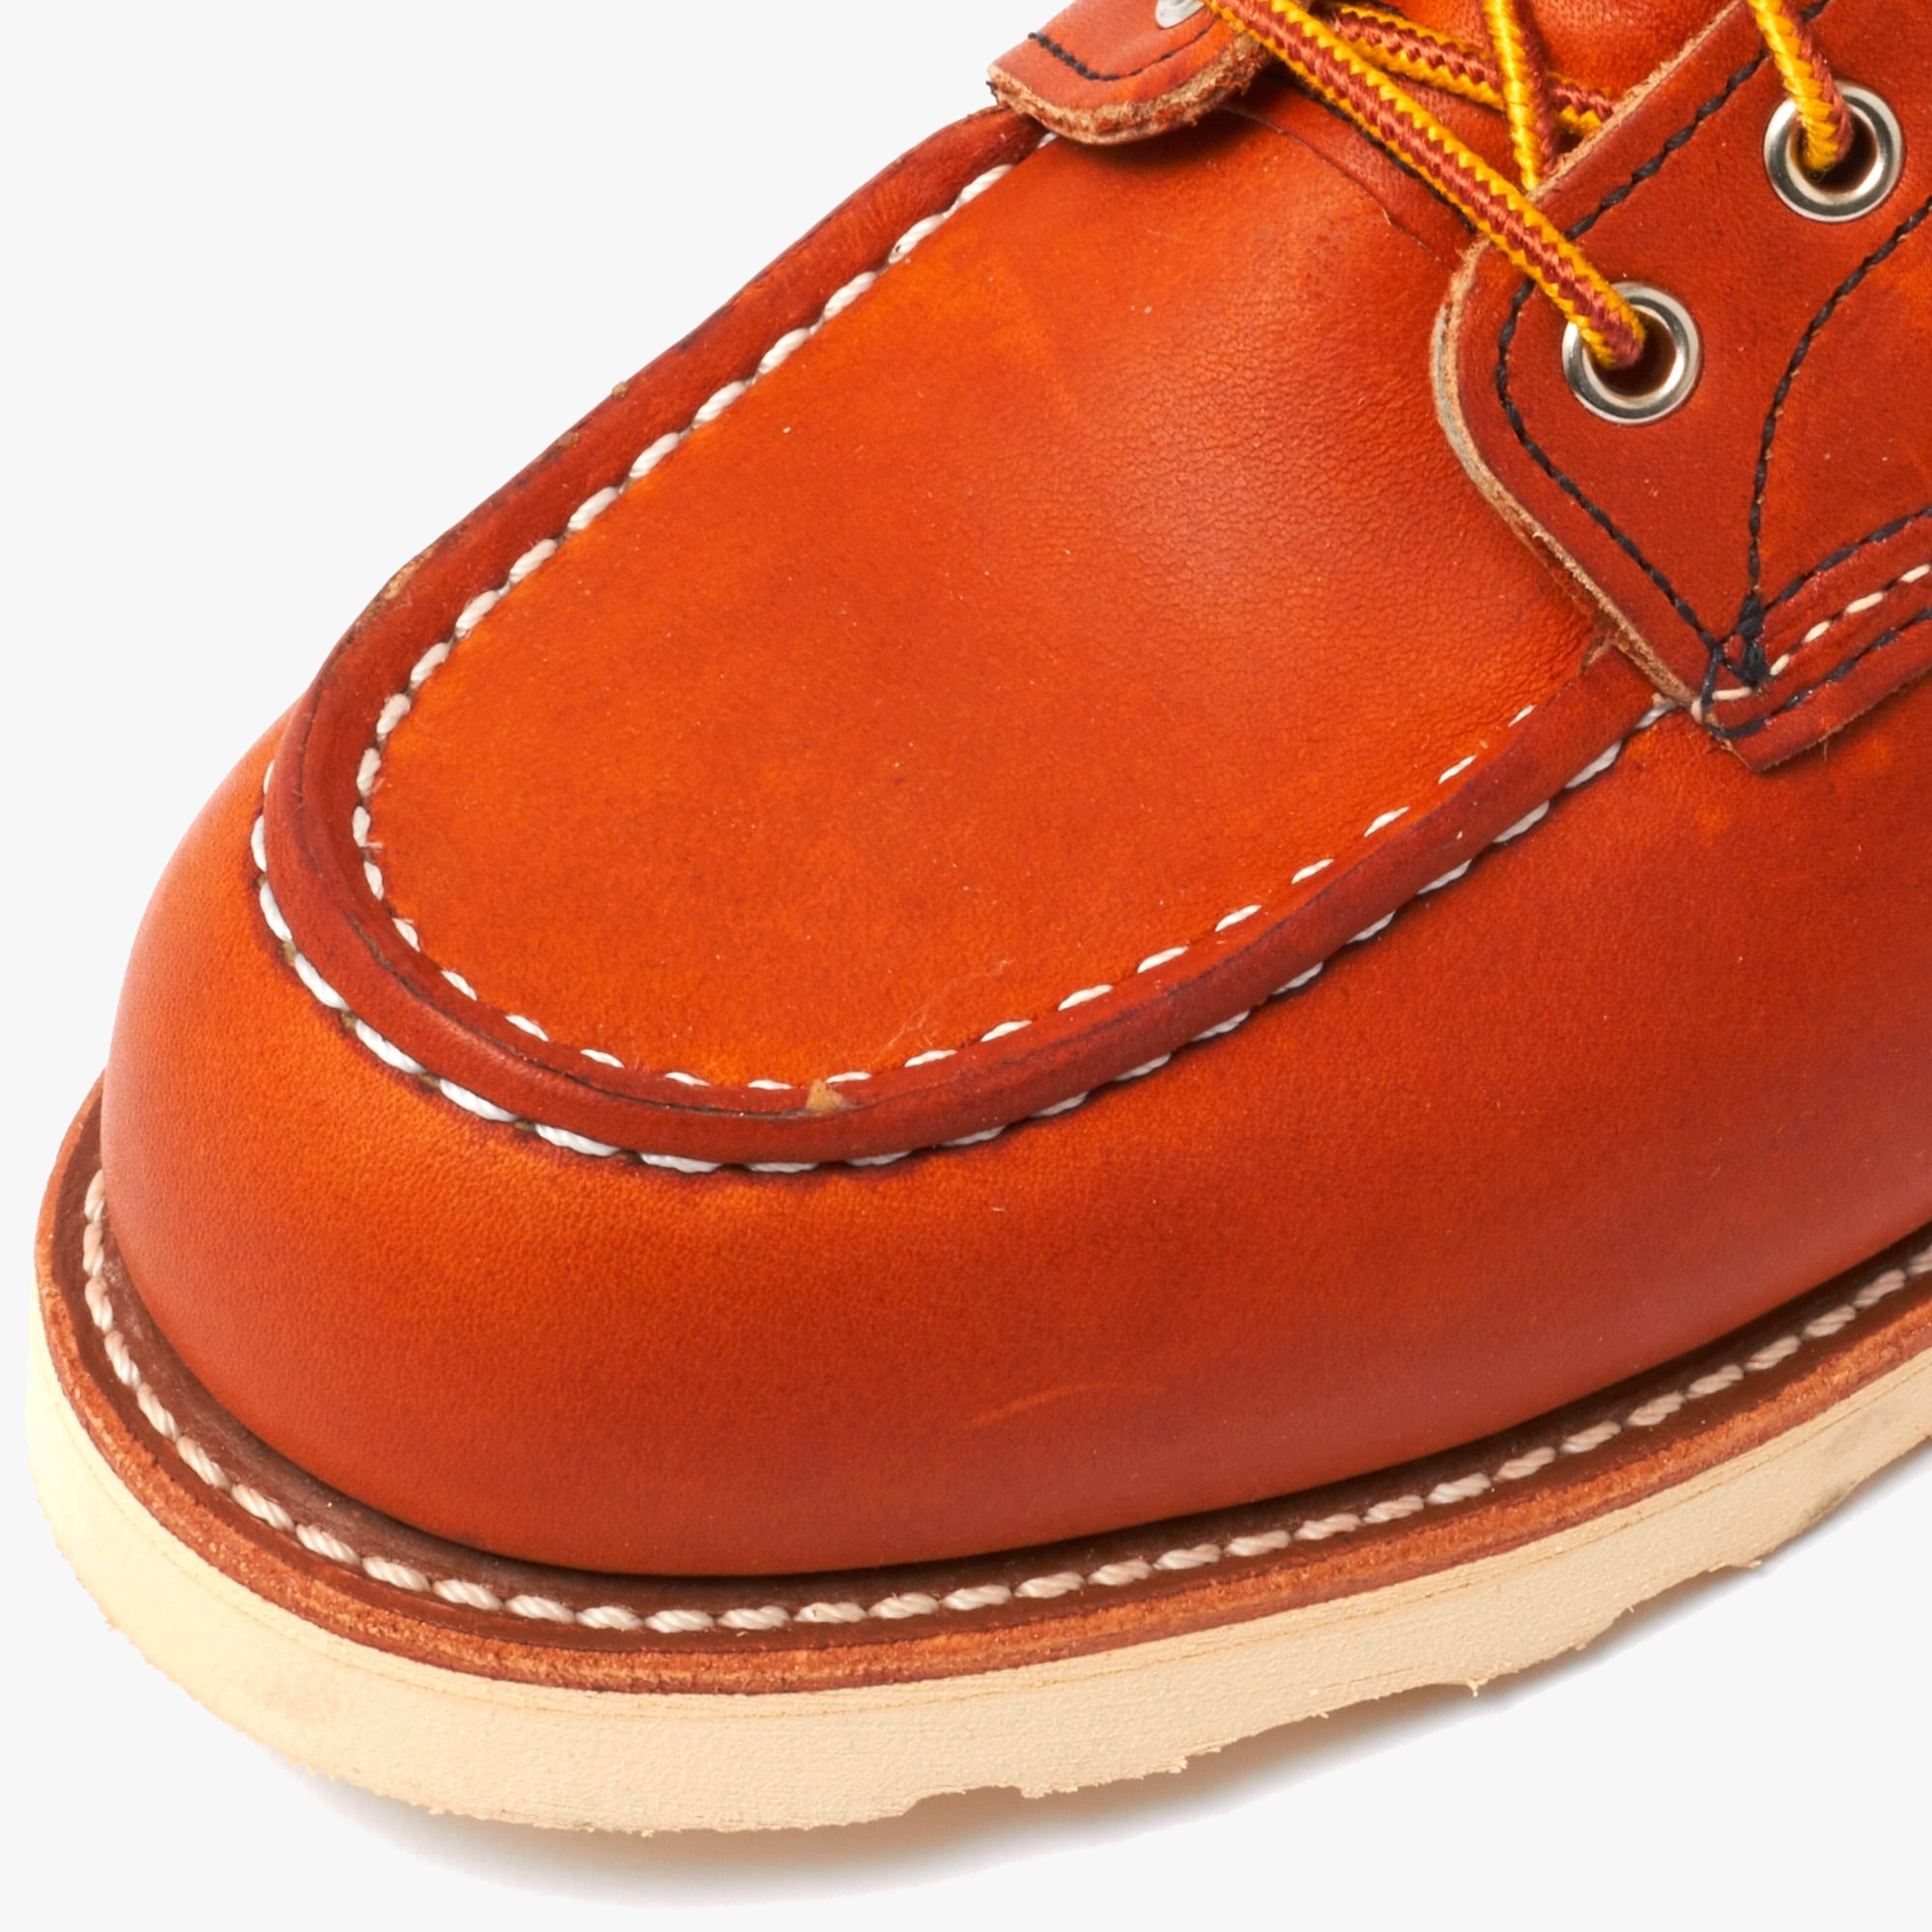 RED WING MOC TOE LEATHER BOOT 875 ORO